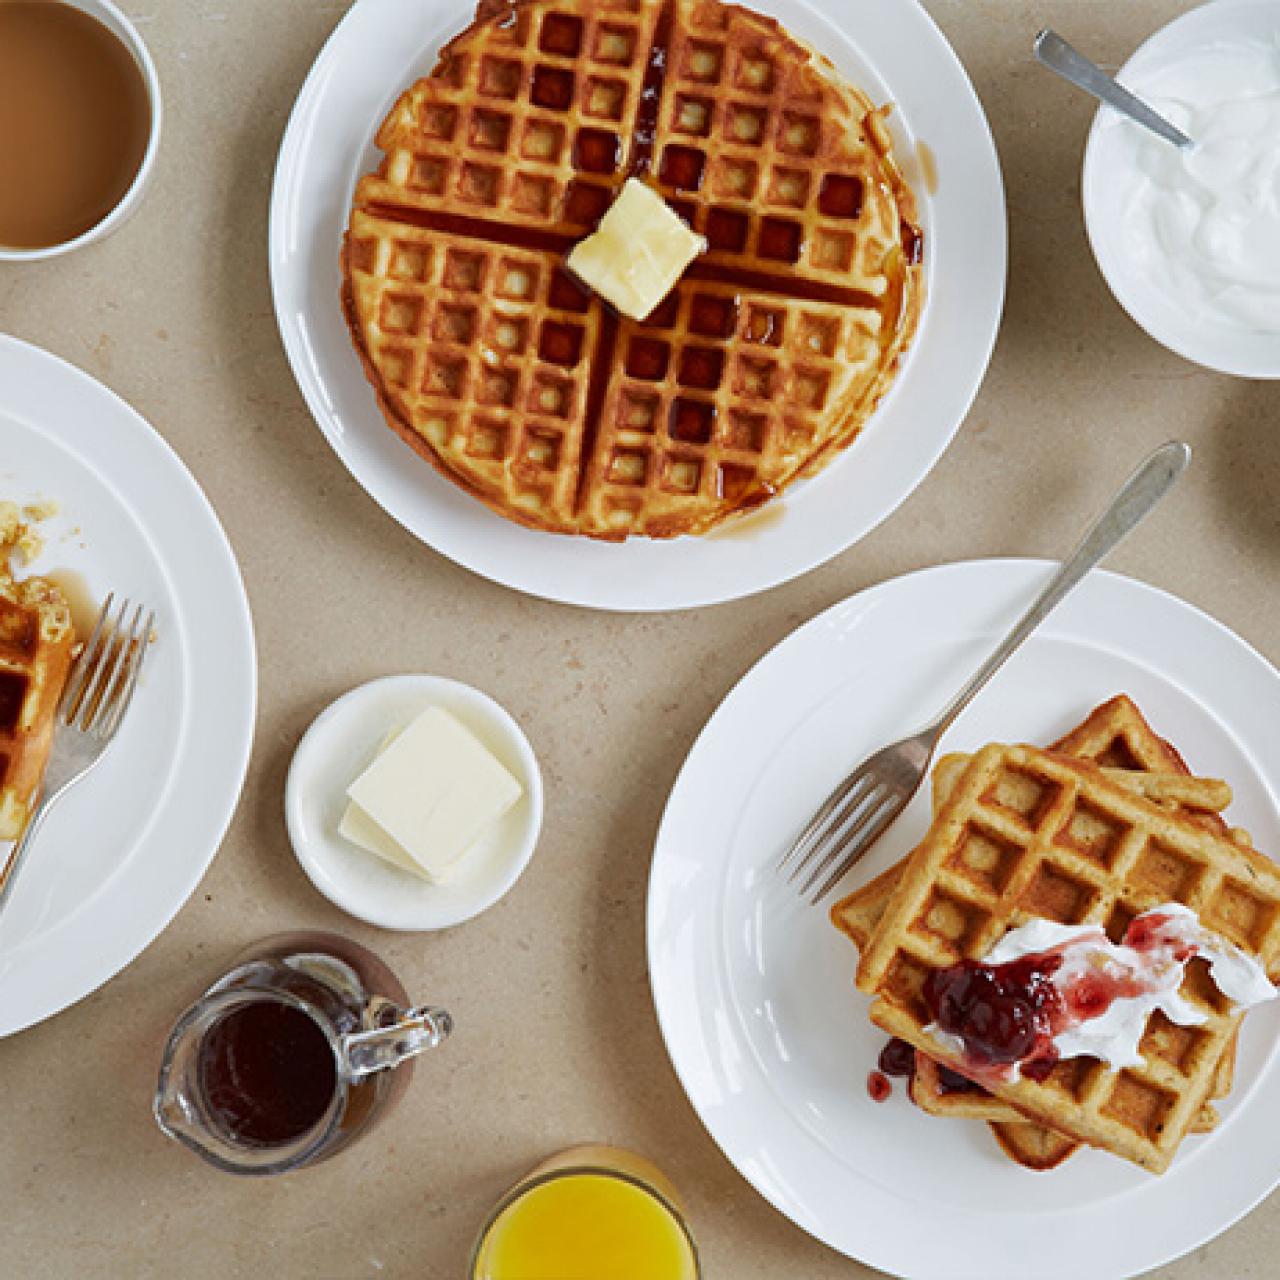 7 Best Waffle Makers 2023 Reviewed, Shopping : Food Network